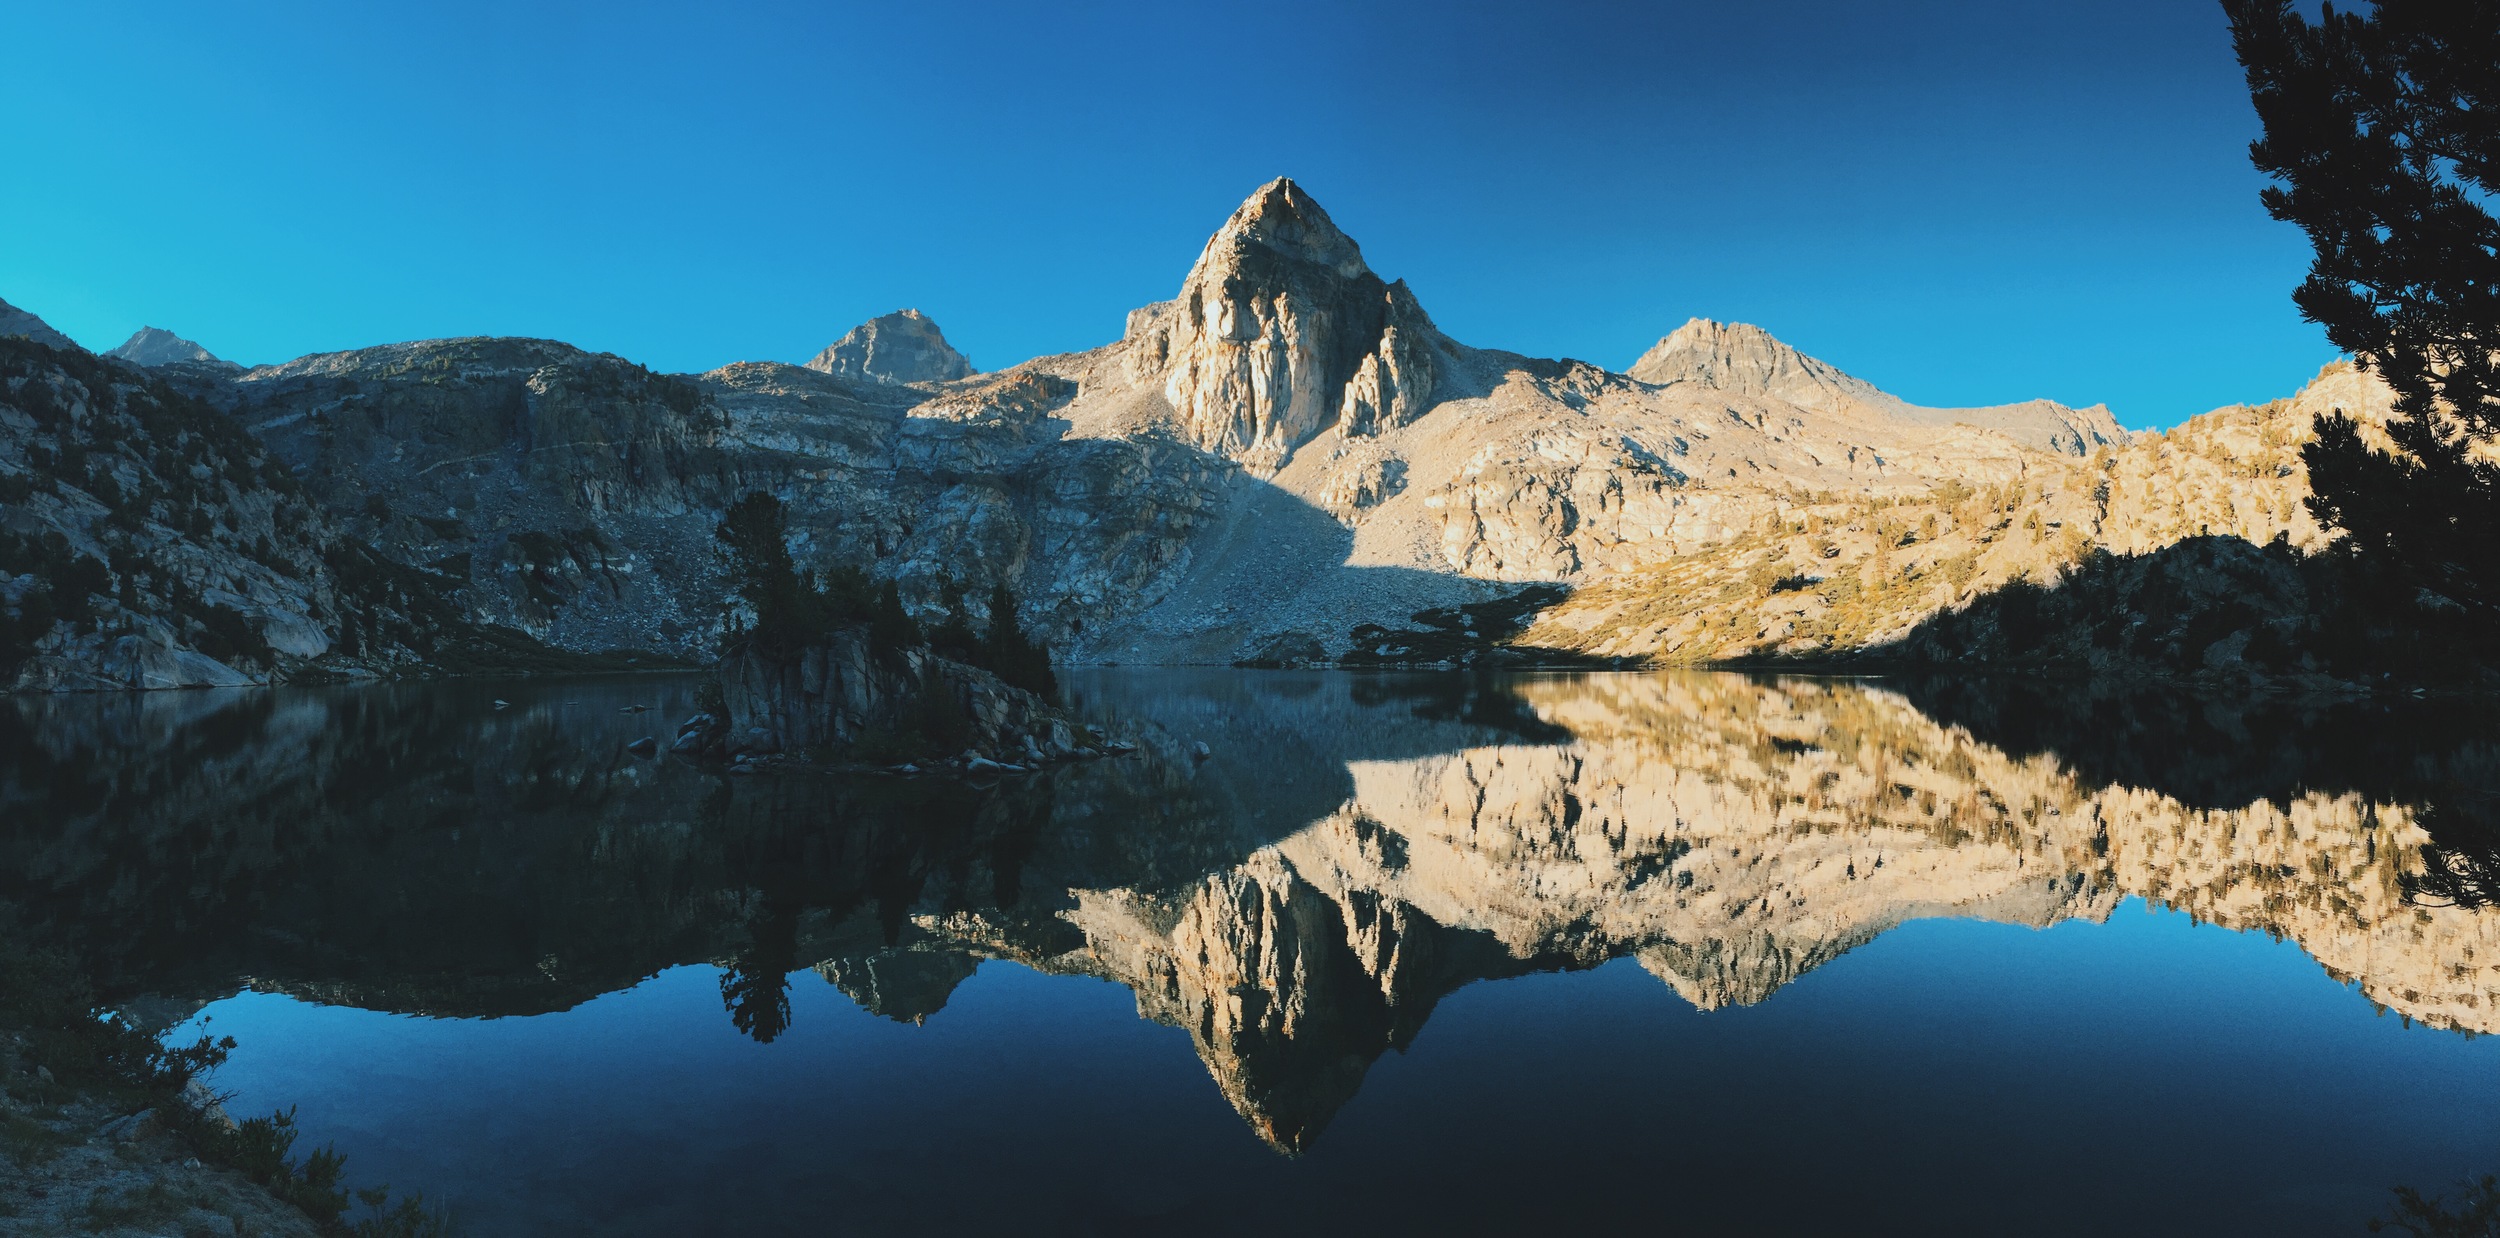  The Painted Lady. Rae Lakes, Kings Canyon National Park 